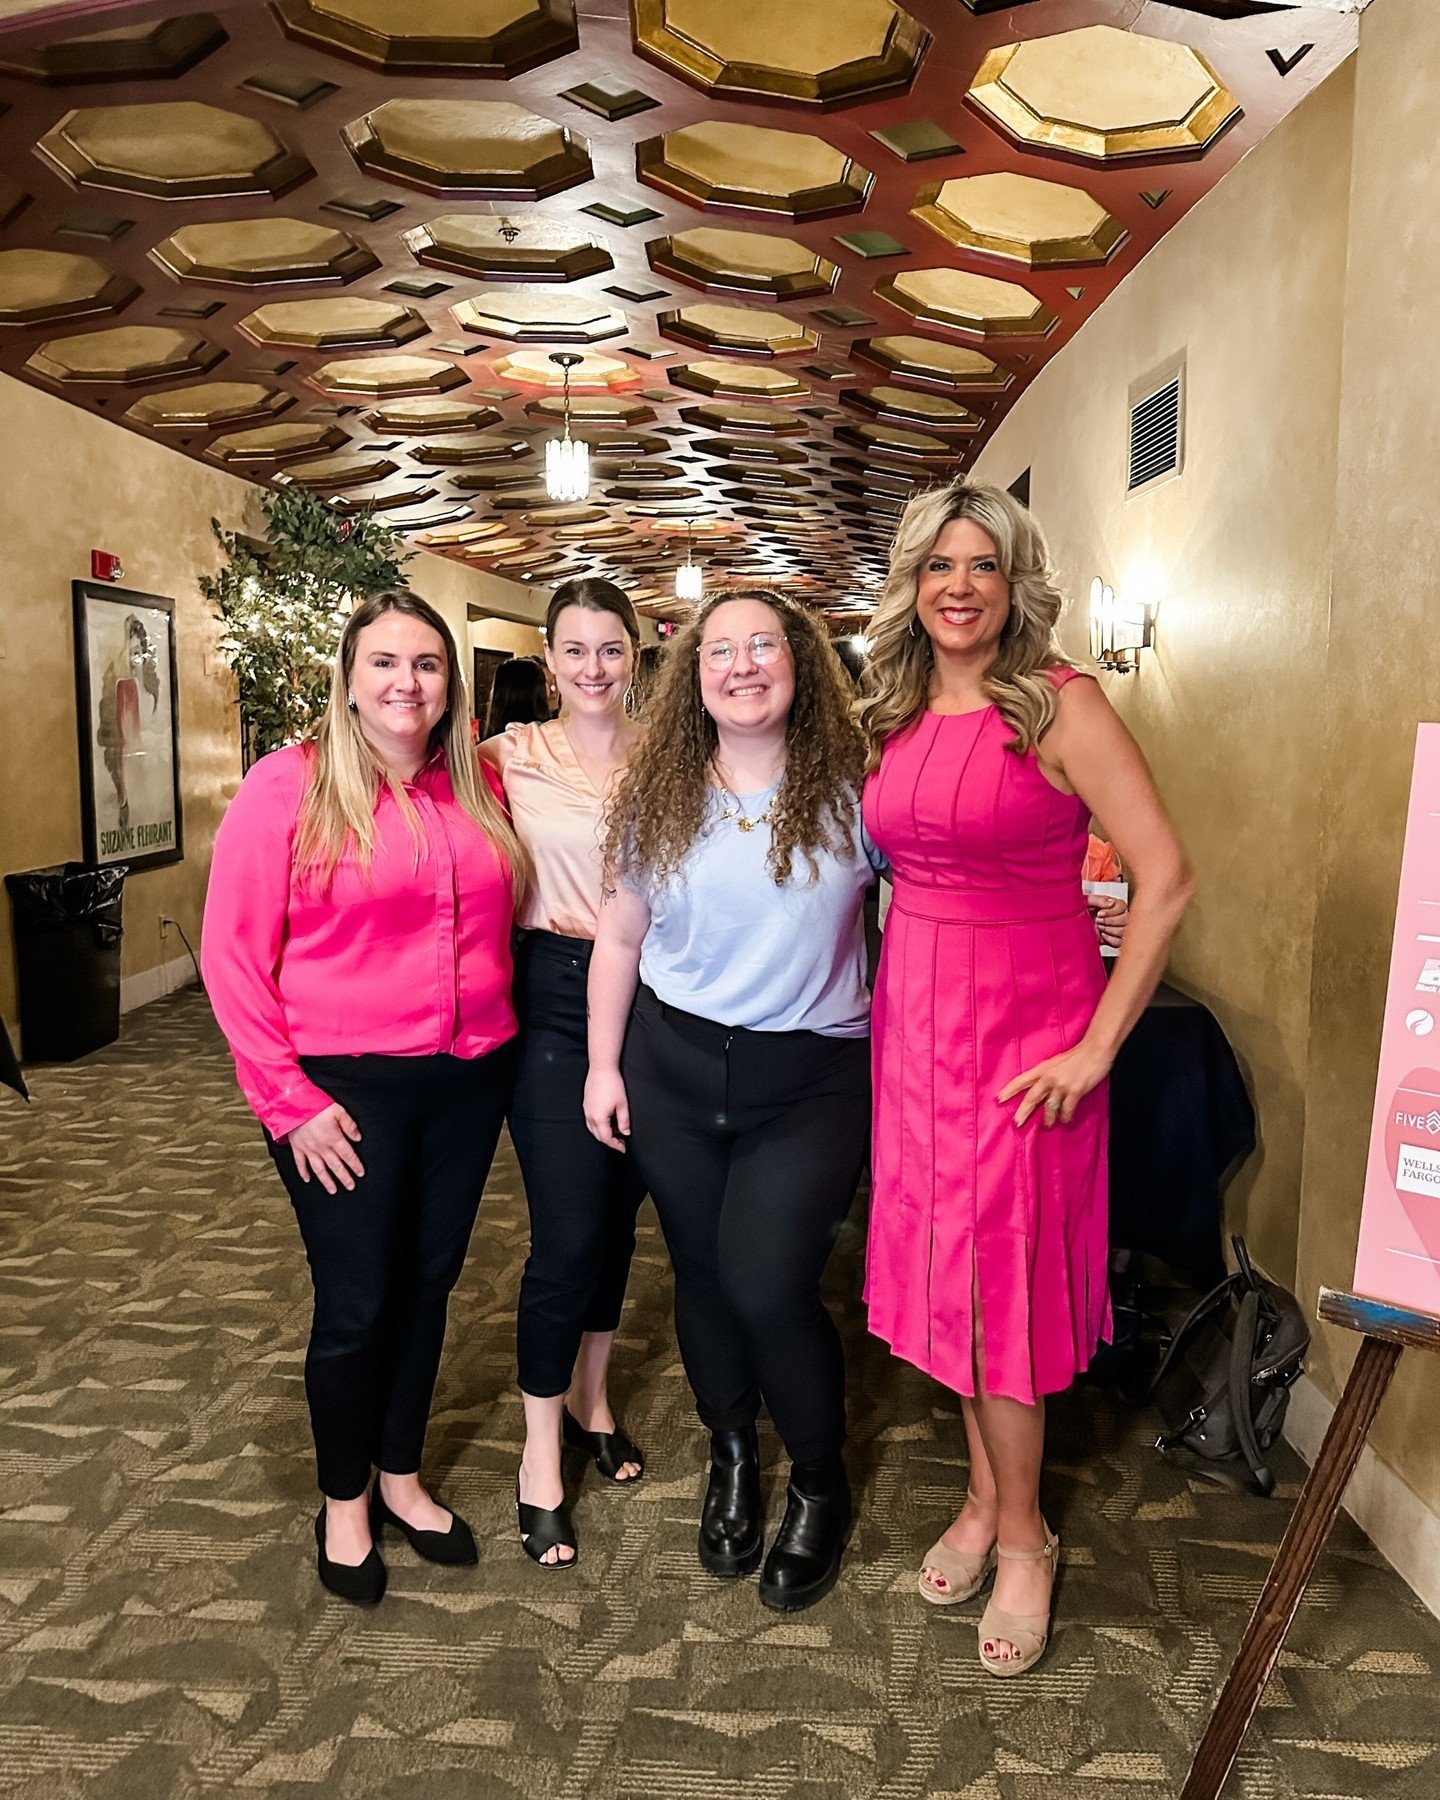 Thank you to the Lincoln Chamber of Commerce and @nebraskabiz for hosting RISE: Women in Business on Thursday! 👏

There were so many ECHO volunteers there! Kelly and Darian managed to grab one of our founding board members, @LizRingCarlson, and our 